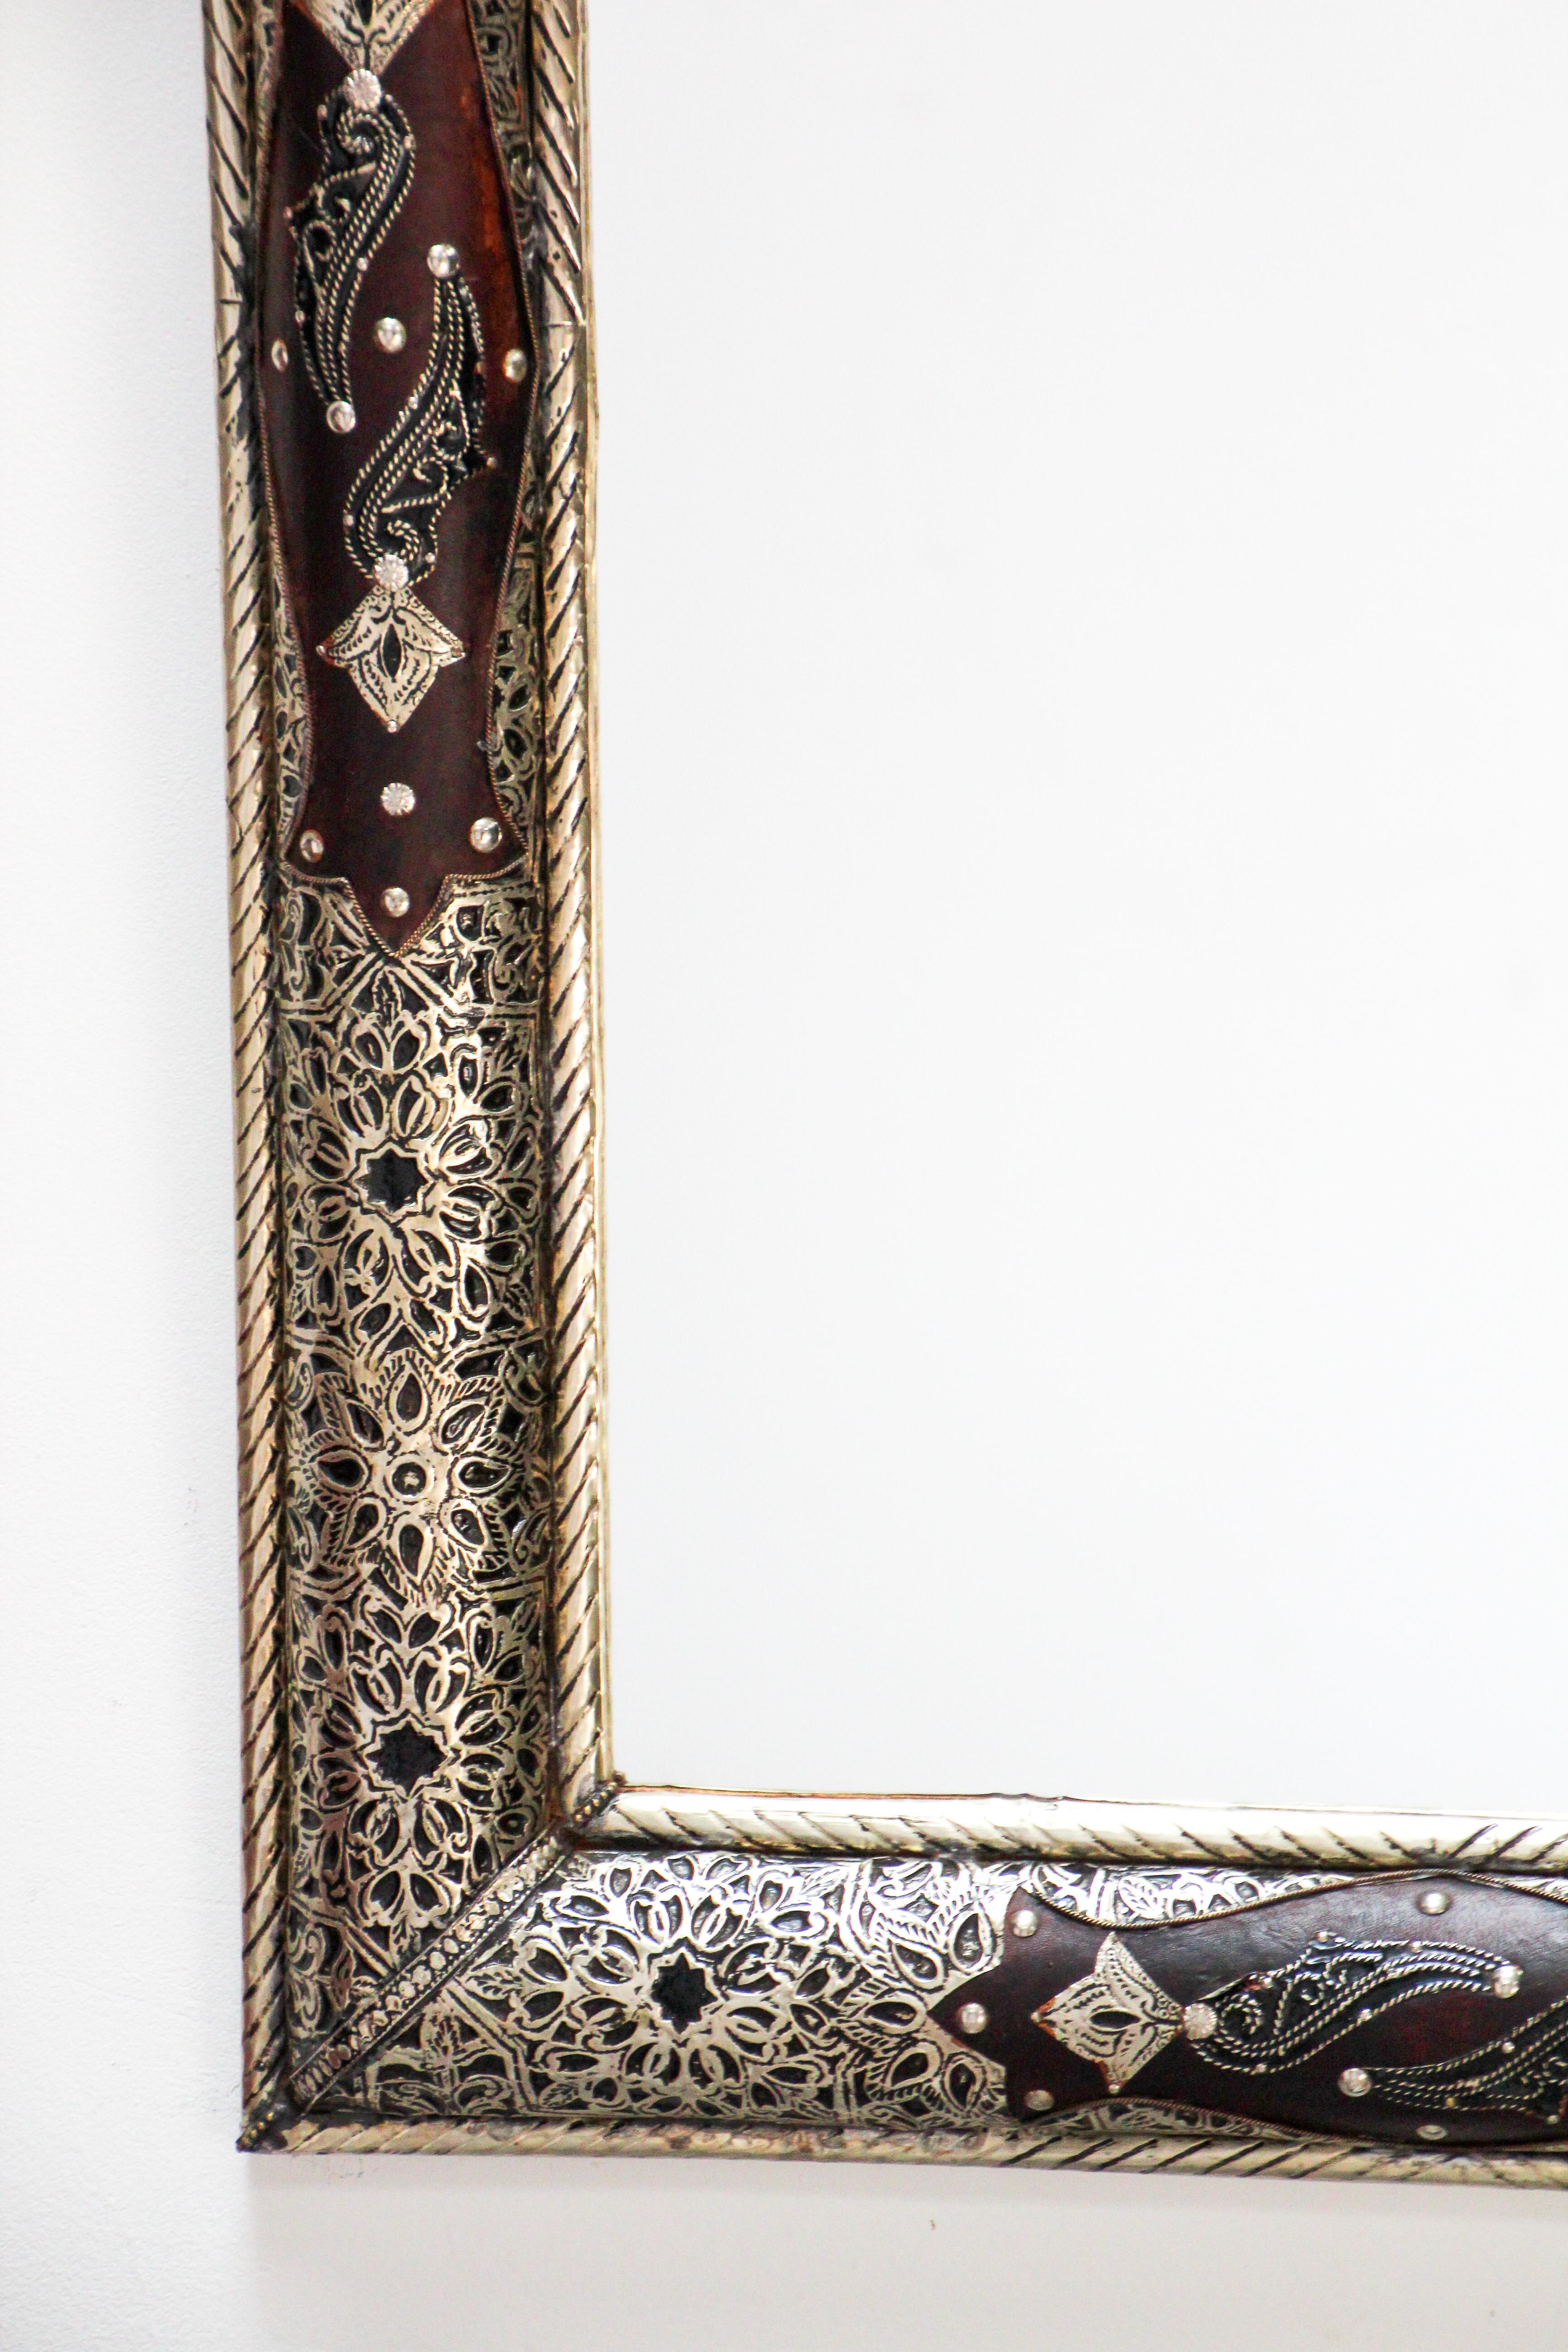 Moroccan Mirror with Silver Filigree and Repousse Metal 7